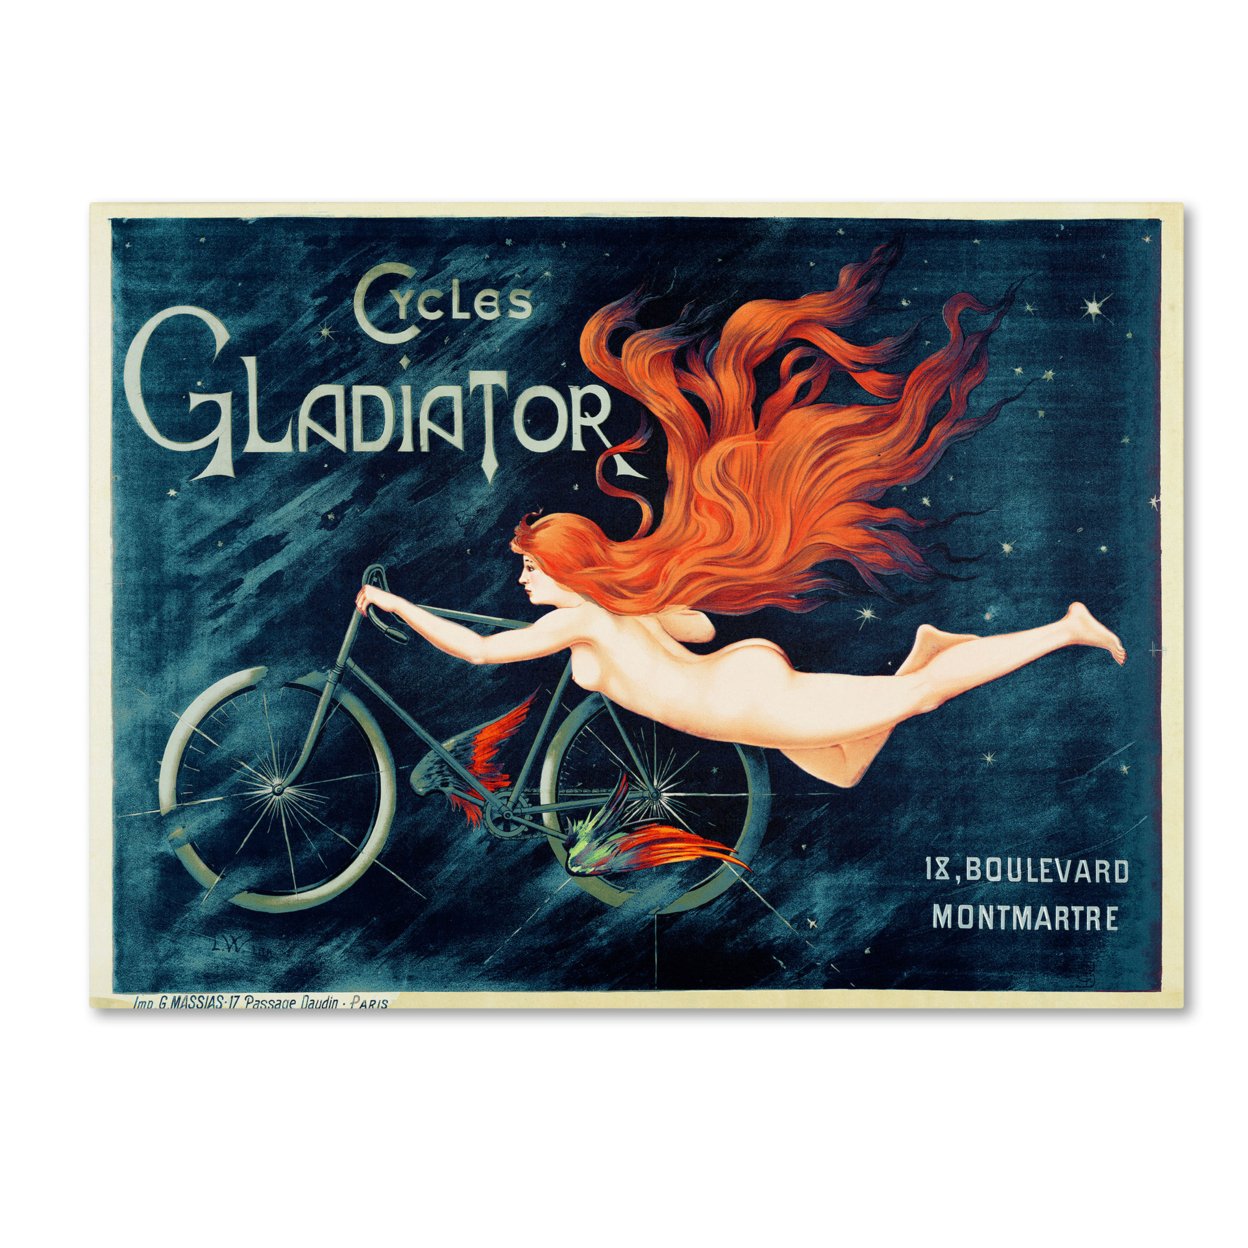 Georges Massias 'Cycles Gladiator' Canvas Art 18 X 24